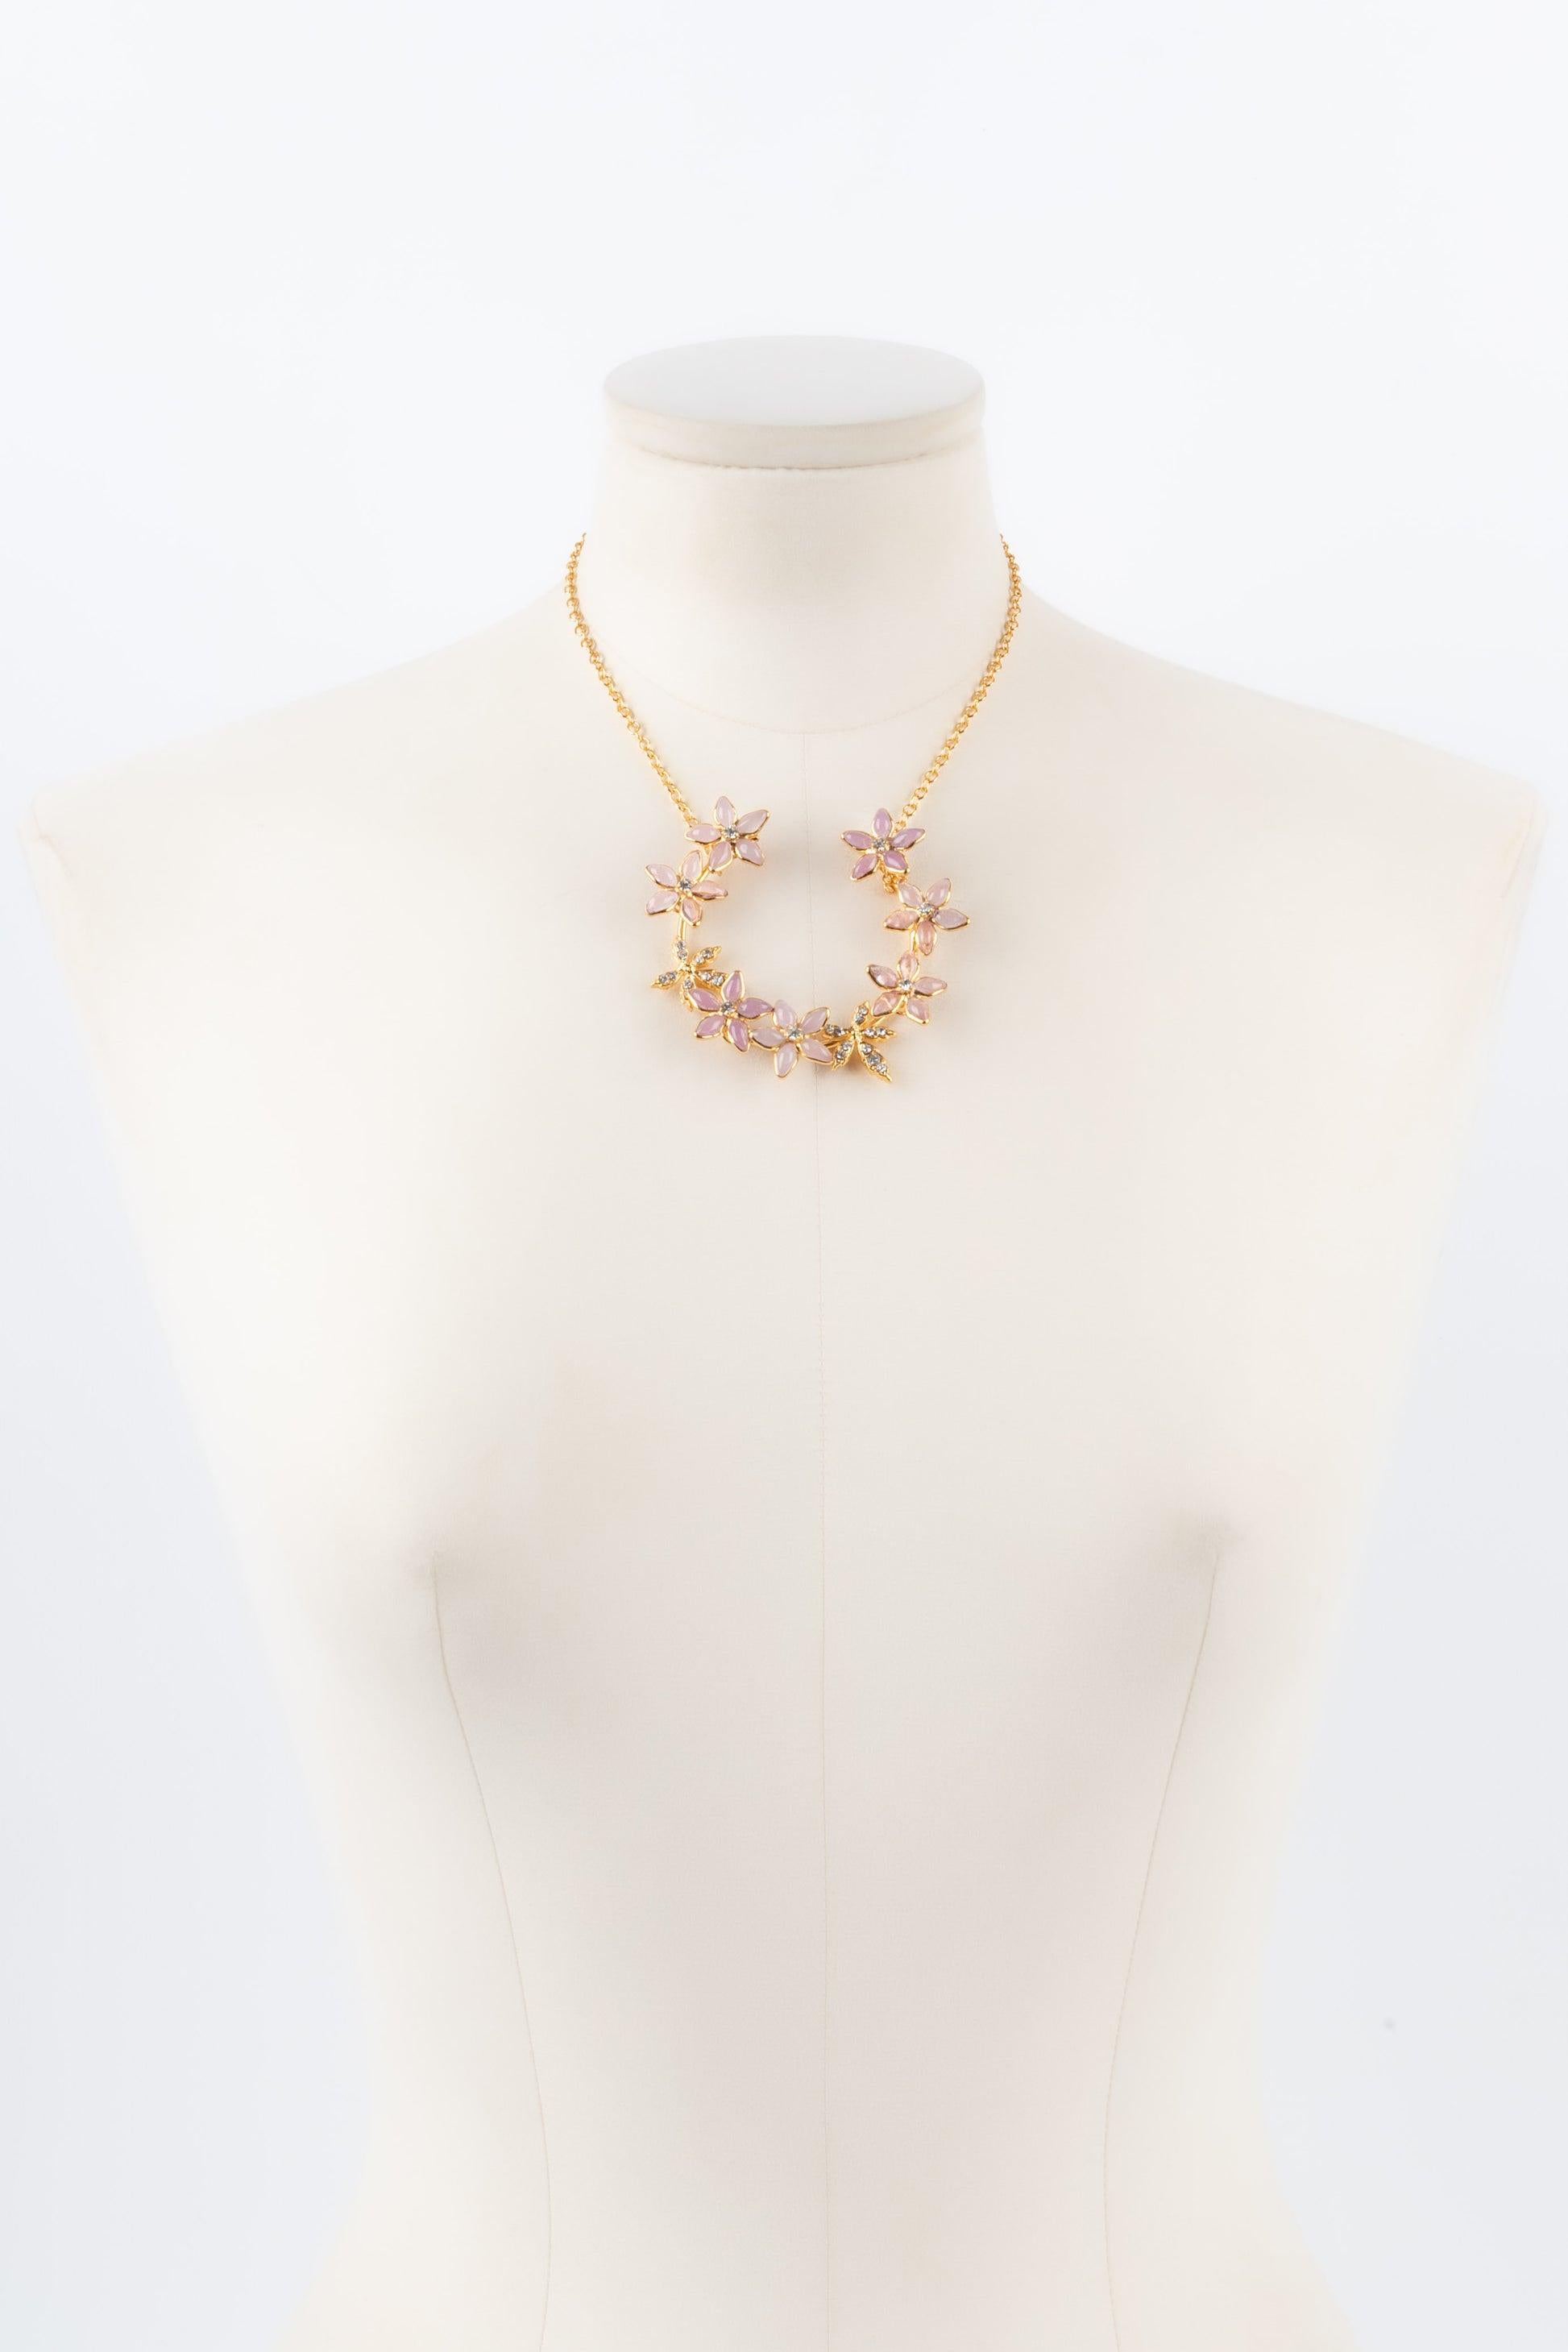 Augustine - Golden metal necklace with rhinestones and glass paste in pale pink tones.

Additional information:
Condition: Very good condition
Dimensions: Length: from 38 cm to 43 cm

Seller Reference: BC233